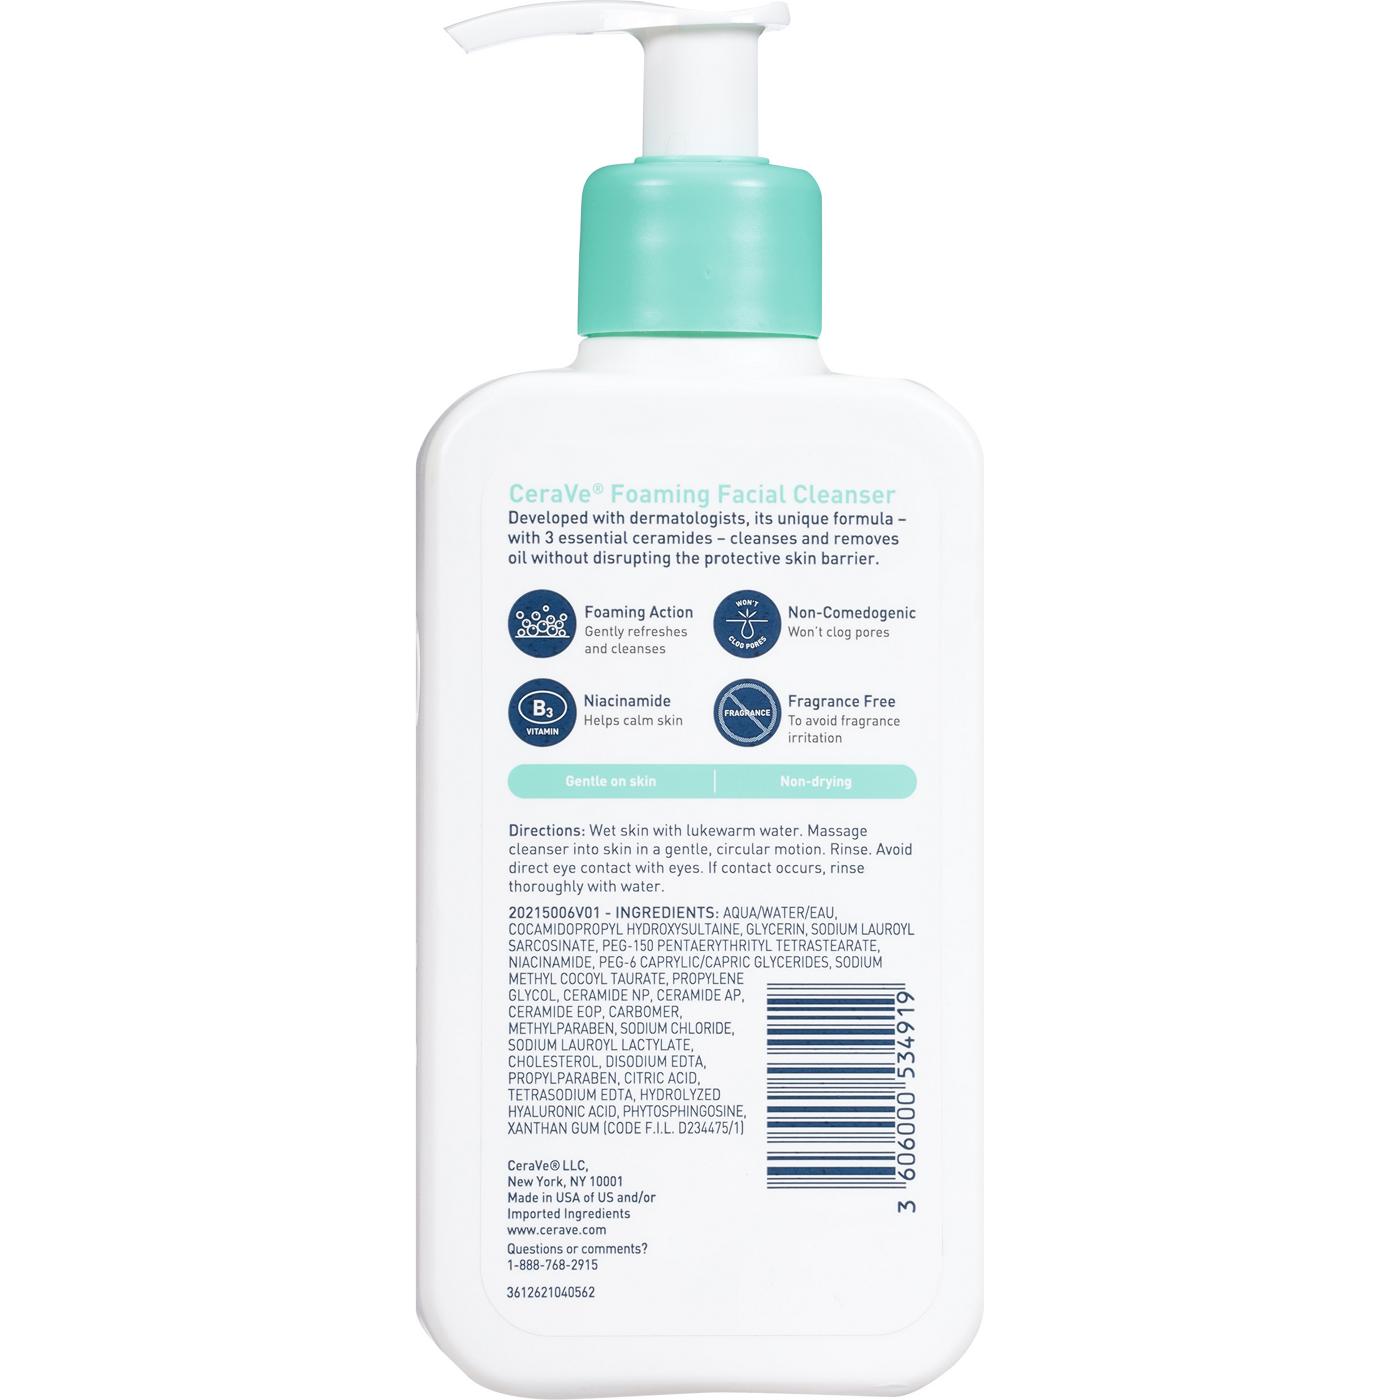 CeraVe Foaming Facial Cleanser; image 3 of 3